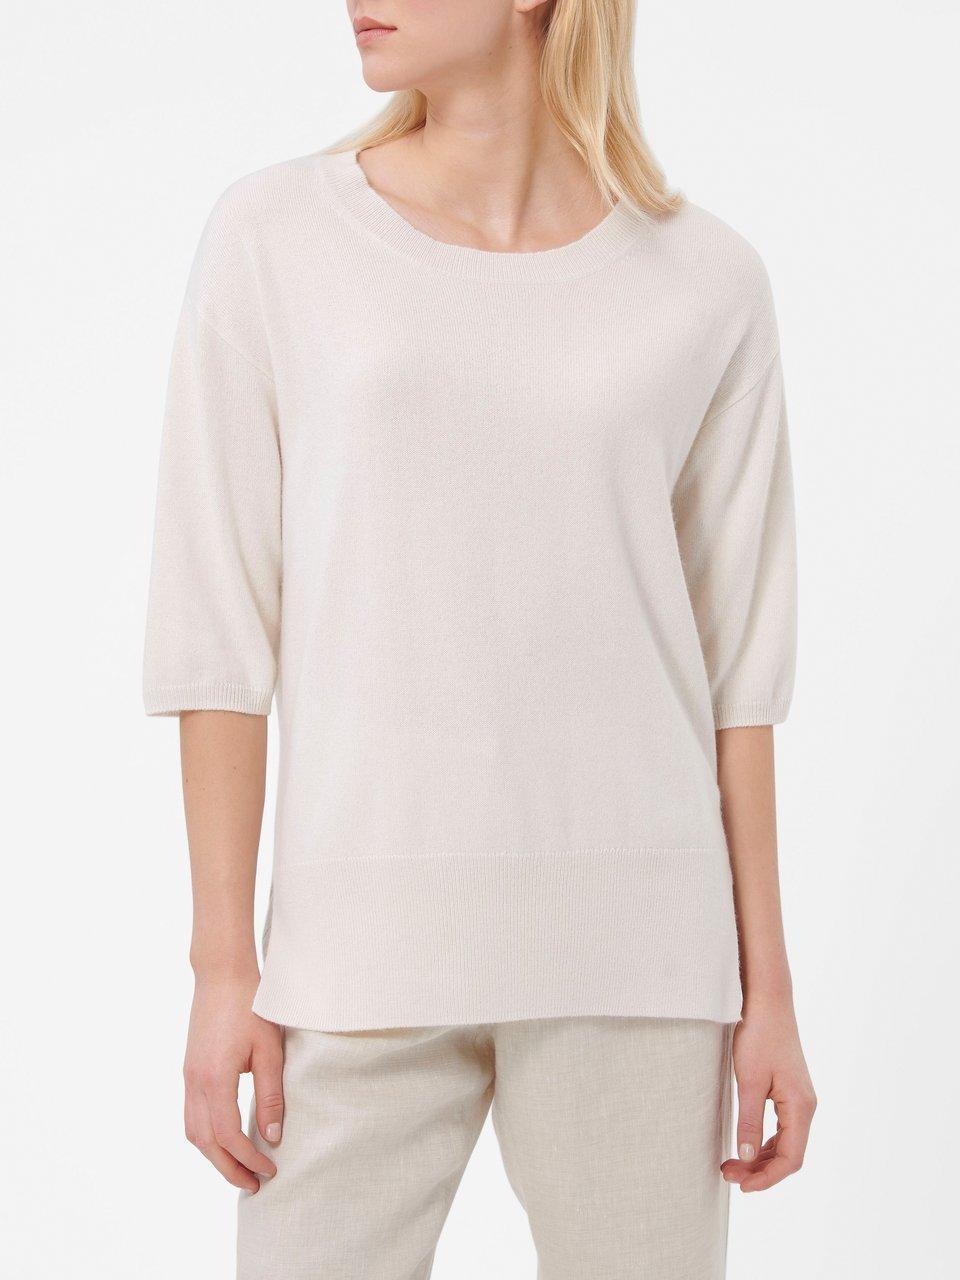 include - Le pull manches 3/4